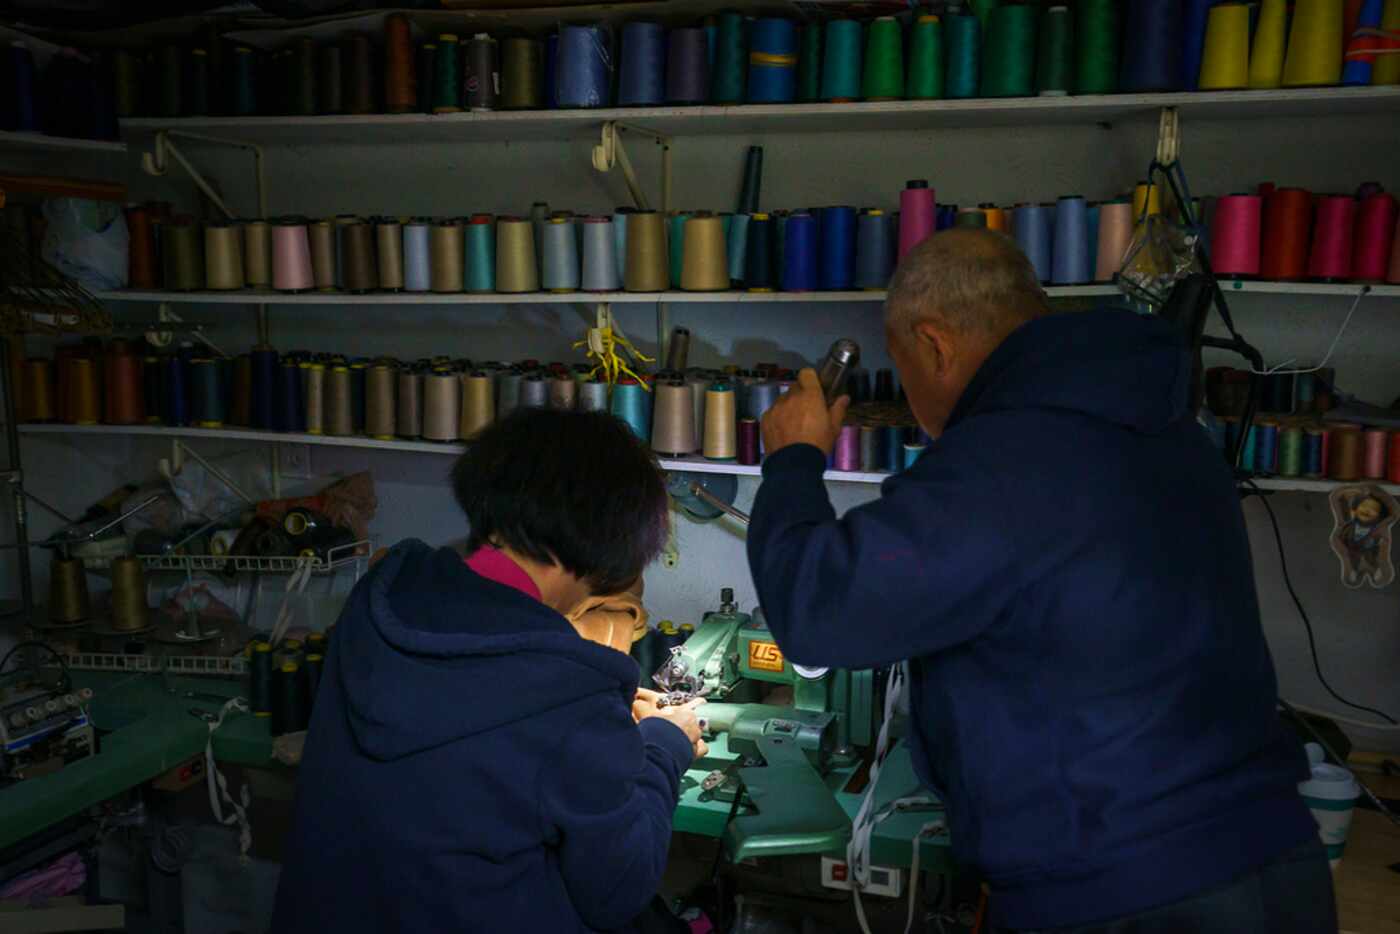 John Seok holds a flashlight for his wife Yoon Seok as she works using a sewing machine at...